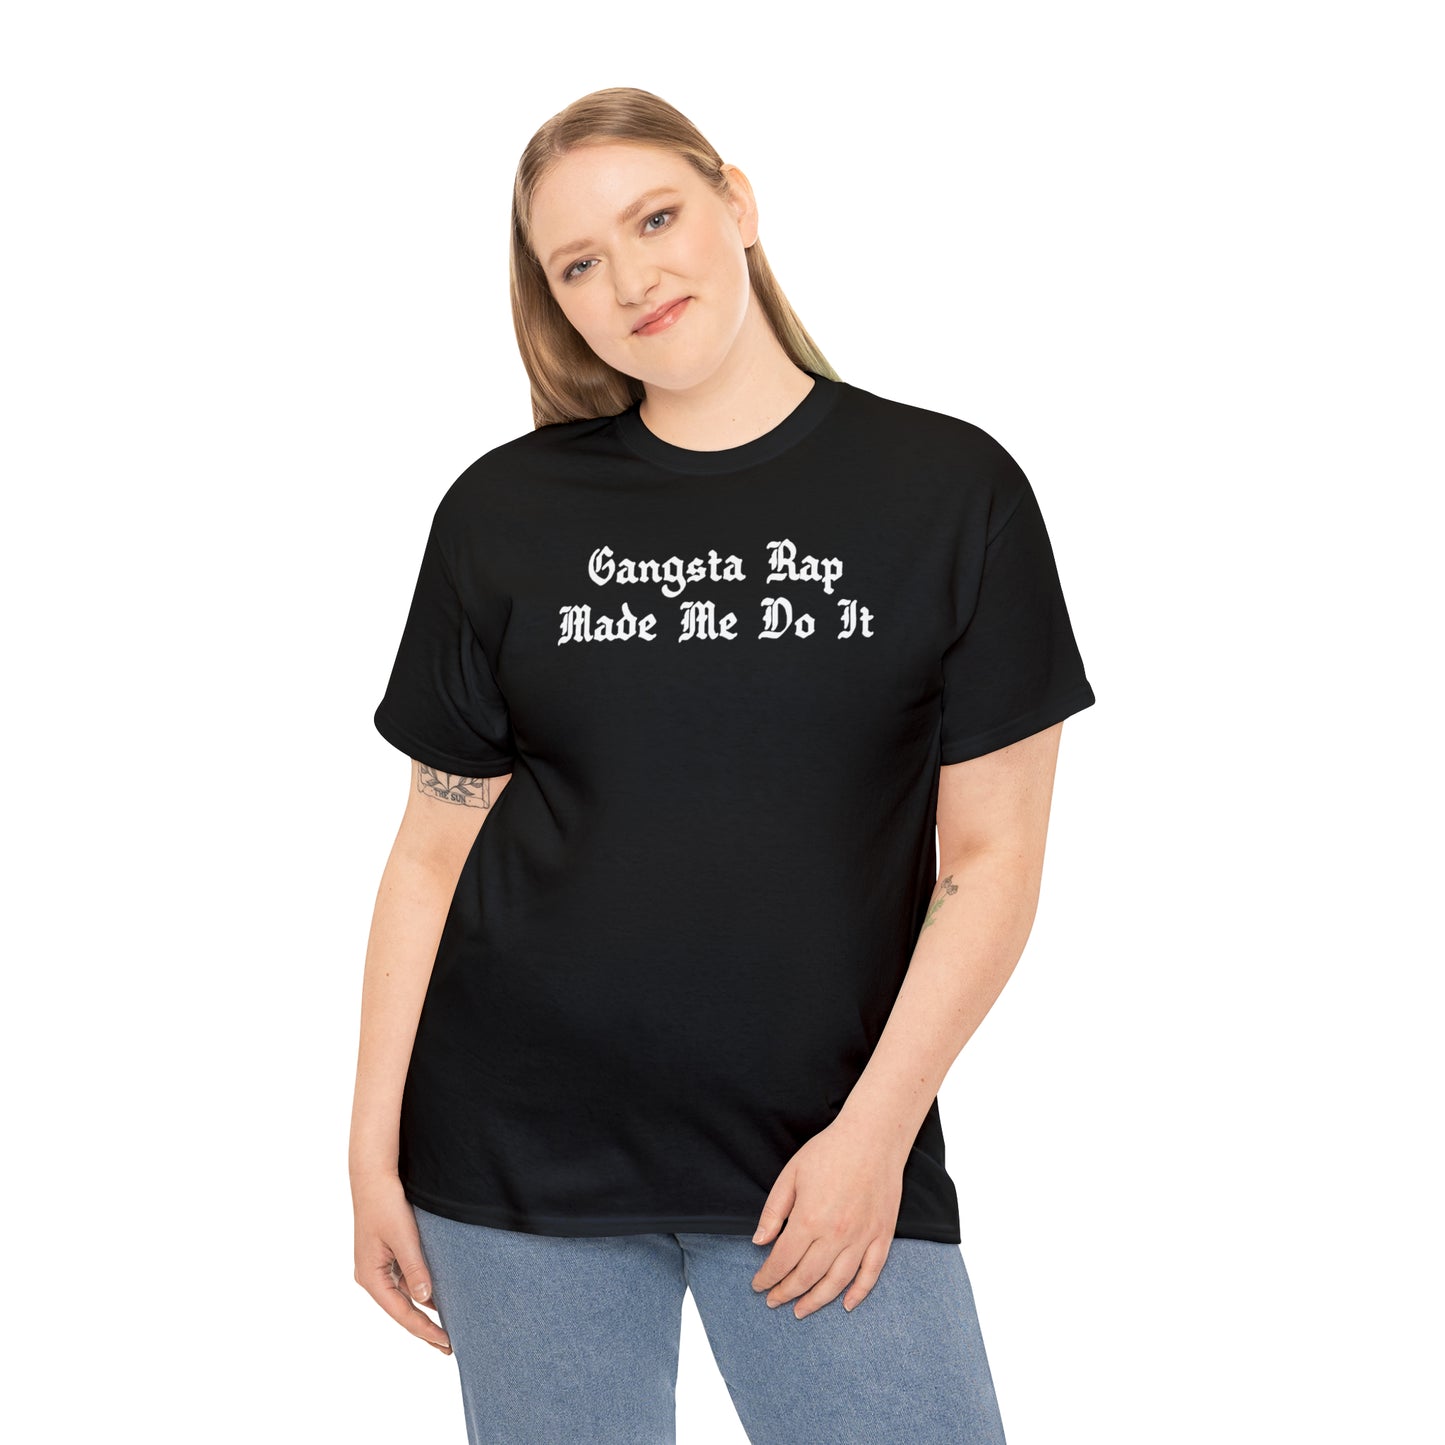 Gangsta Rap Made Me Do It Shirt Great gift for a Hip-Hop & Rap Lover T-Shirt, Rap T-Shirt, Gangsta Rap Tee